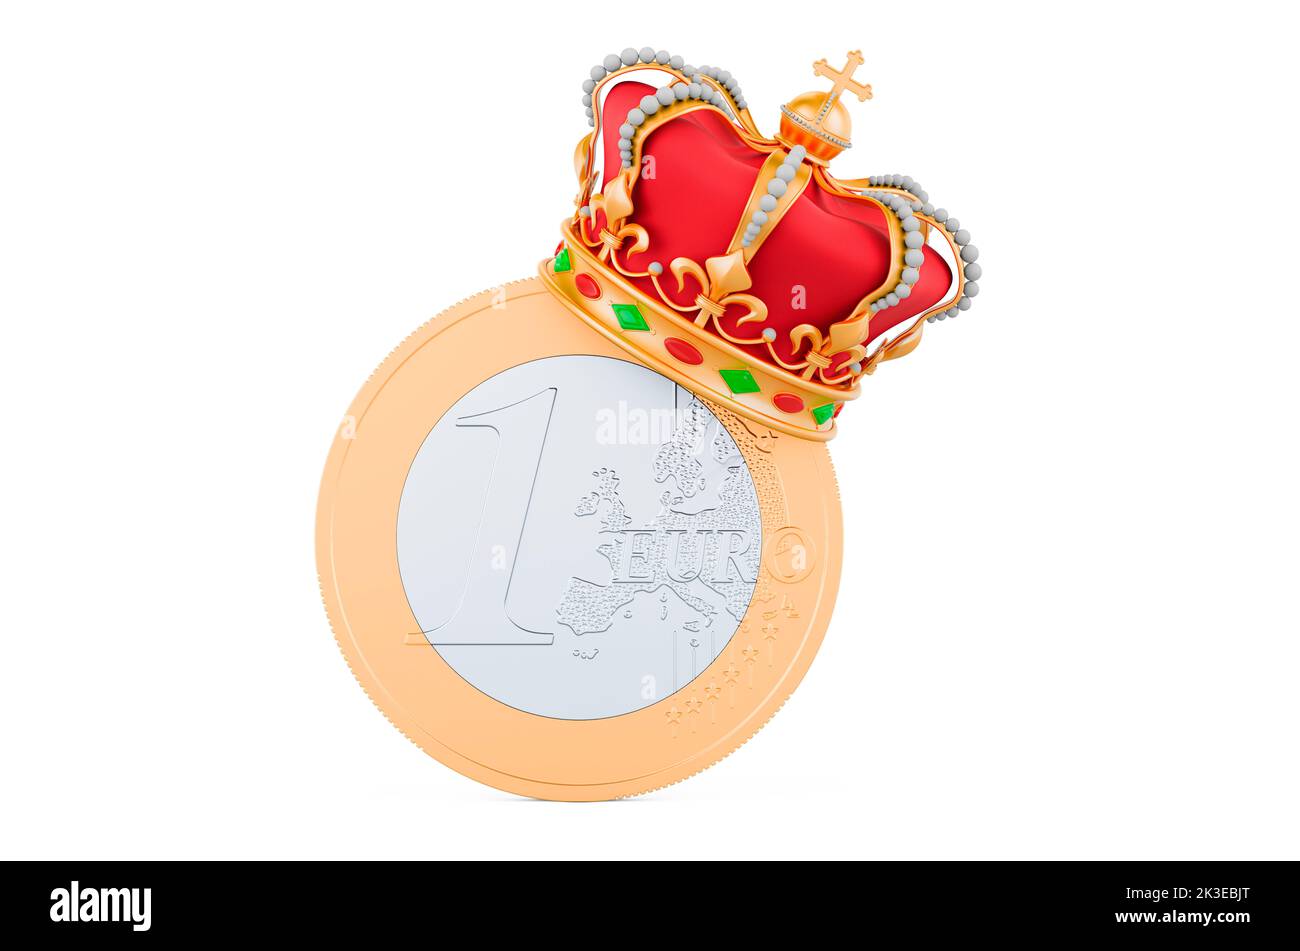 Euro coin with golden crown. 3D rendering isolated on white background Stock Photo